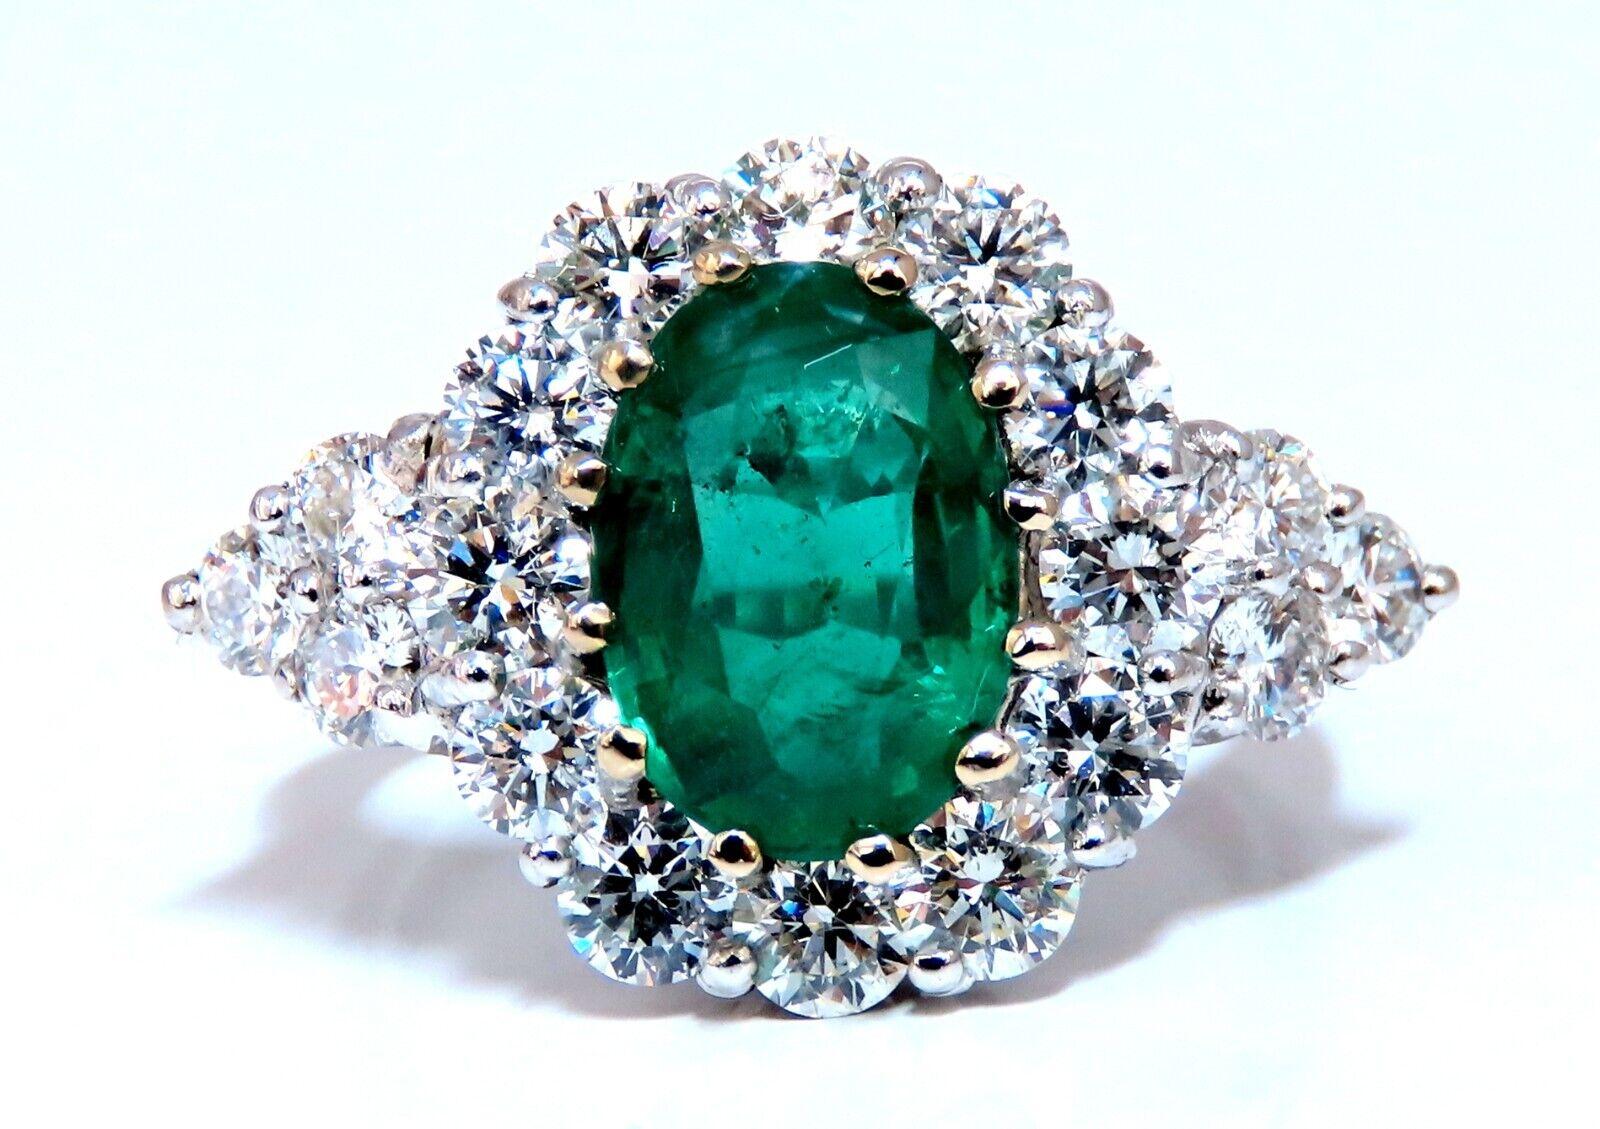 GIA certified natural emerald and diamonds ring.

Report number 22255-33641

Stating 2.47 carat. Green color and transparent.

F2 clarity enhanced.

Measures 10.6 by 7.5 mm

2.20 carat side diamonds.
round full cut brilliant g / h color
Vs2